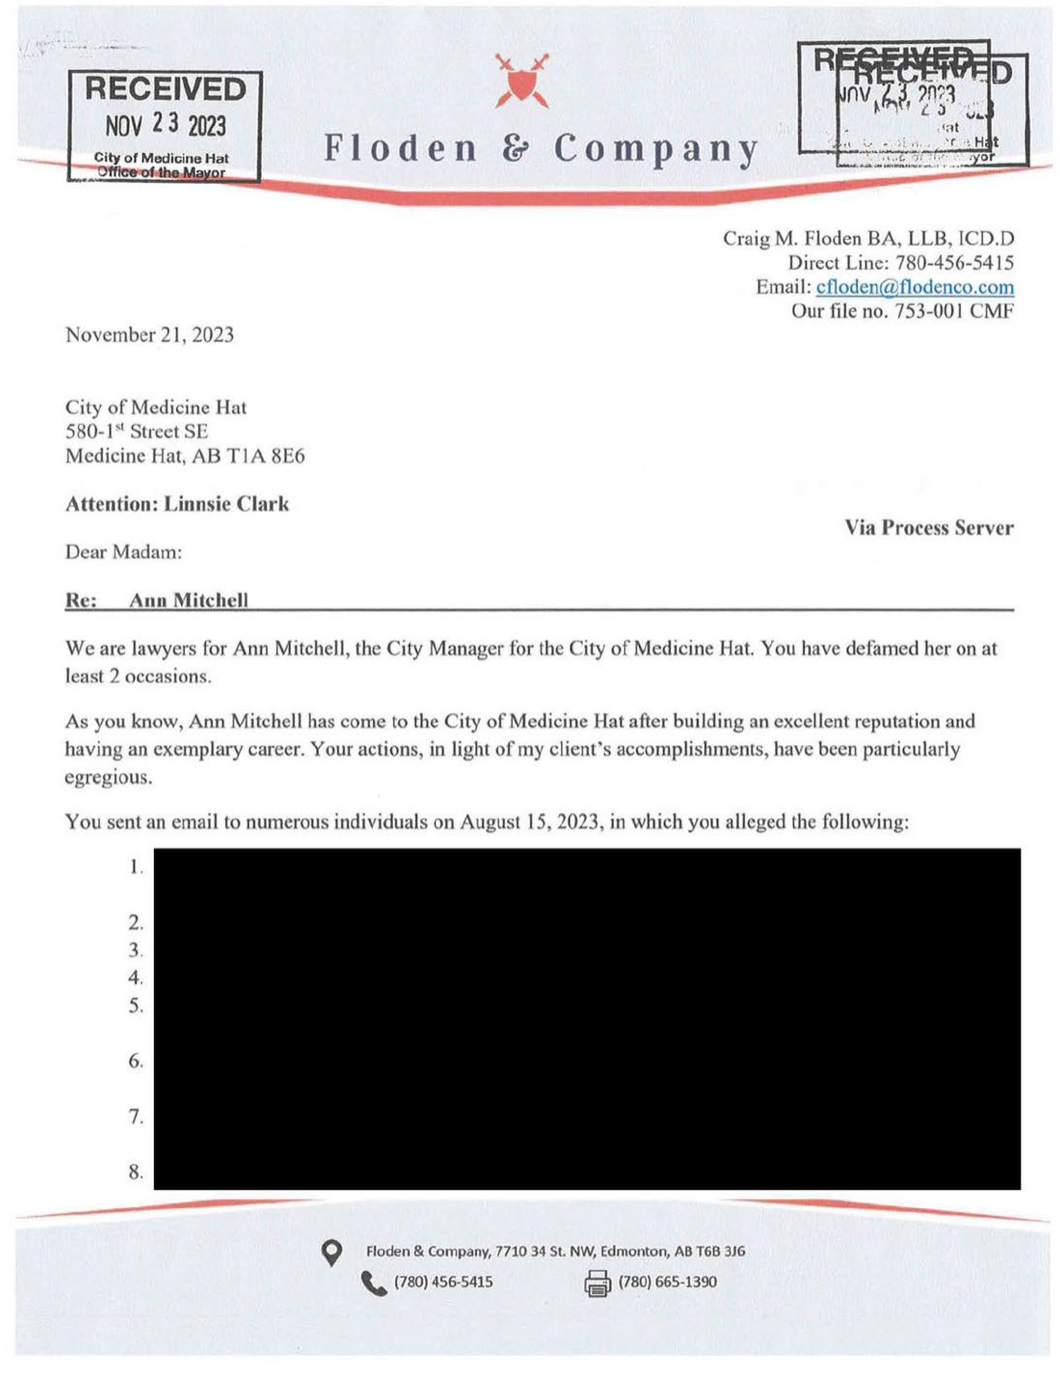 Nov 21 2023 Cease and Desist Letter To Mayor From CM Lawyers pg 1.png